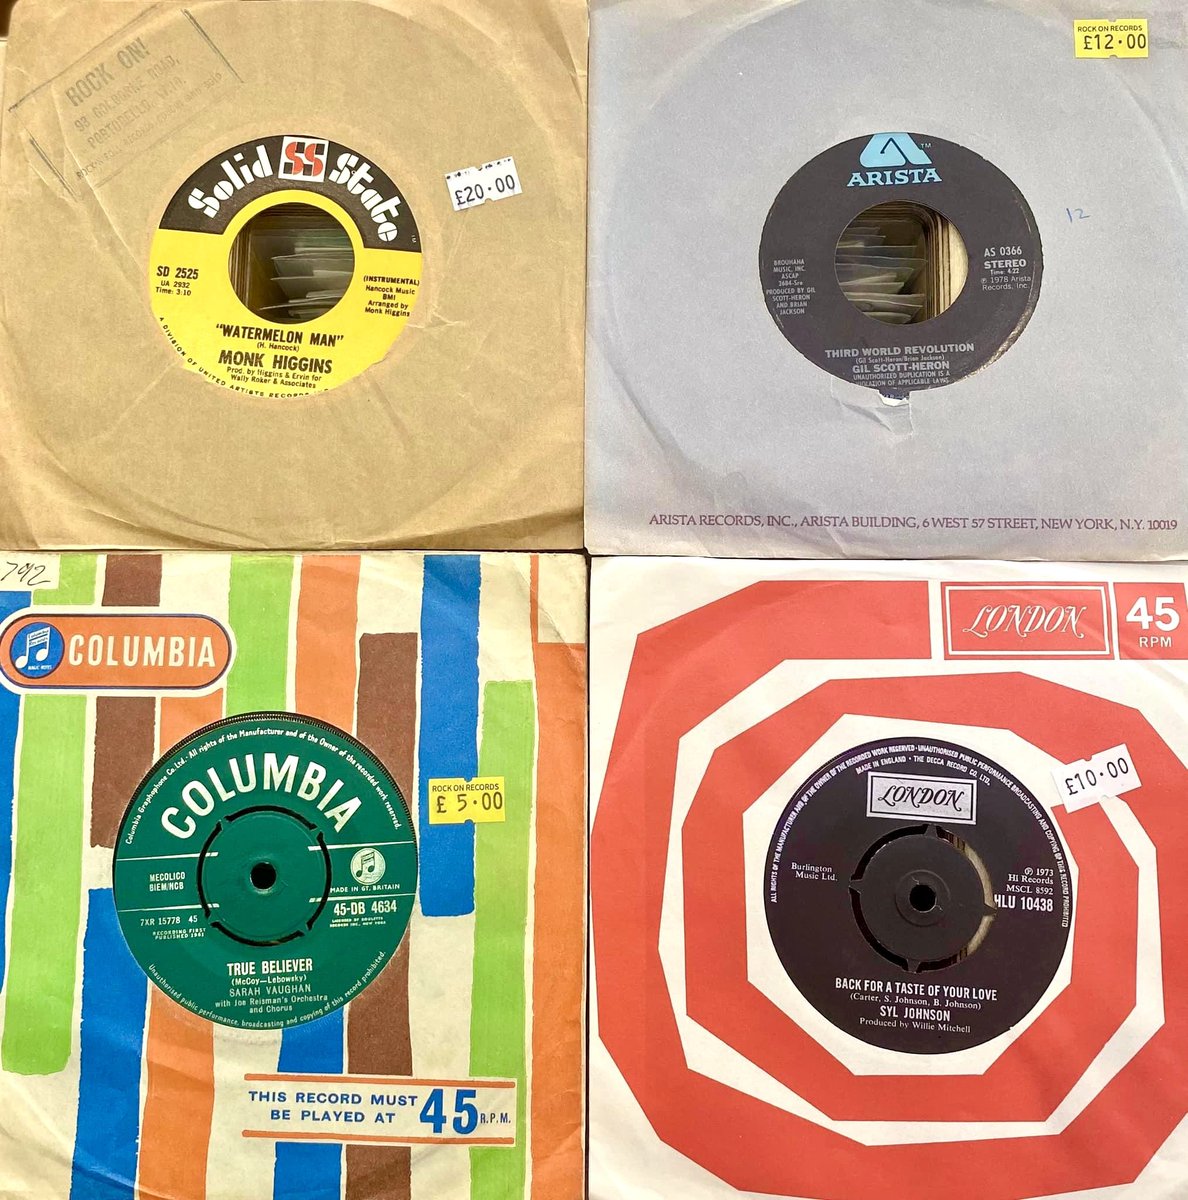 Sweet Soul Music at Rock On Records UK

We have 1000’s of Soul 45s in stock at fantastic prices

All profits going to charity

#rarerecords #rarevinyl #shopstamford #charity #lovevinyl #lovemusic @AceRecordsLtd